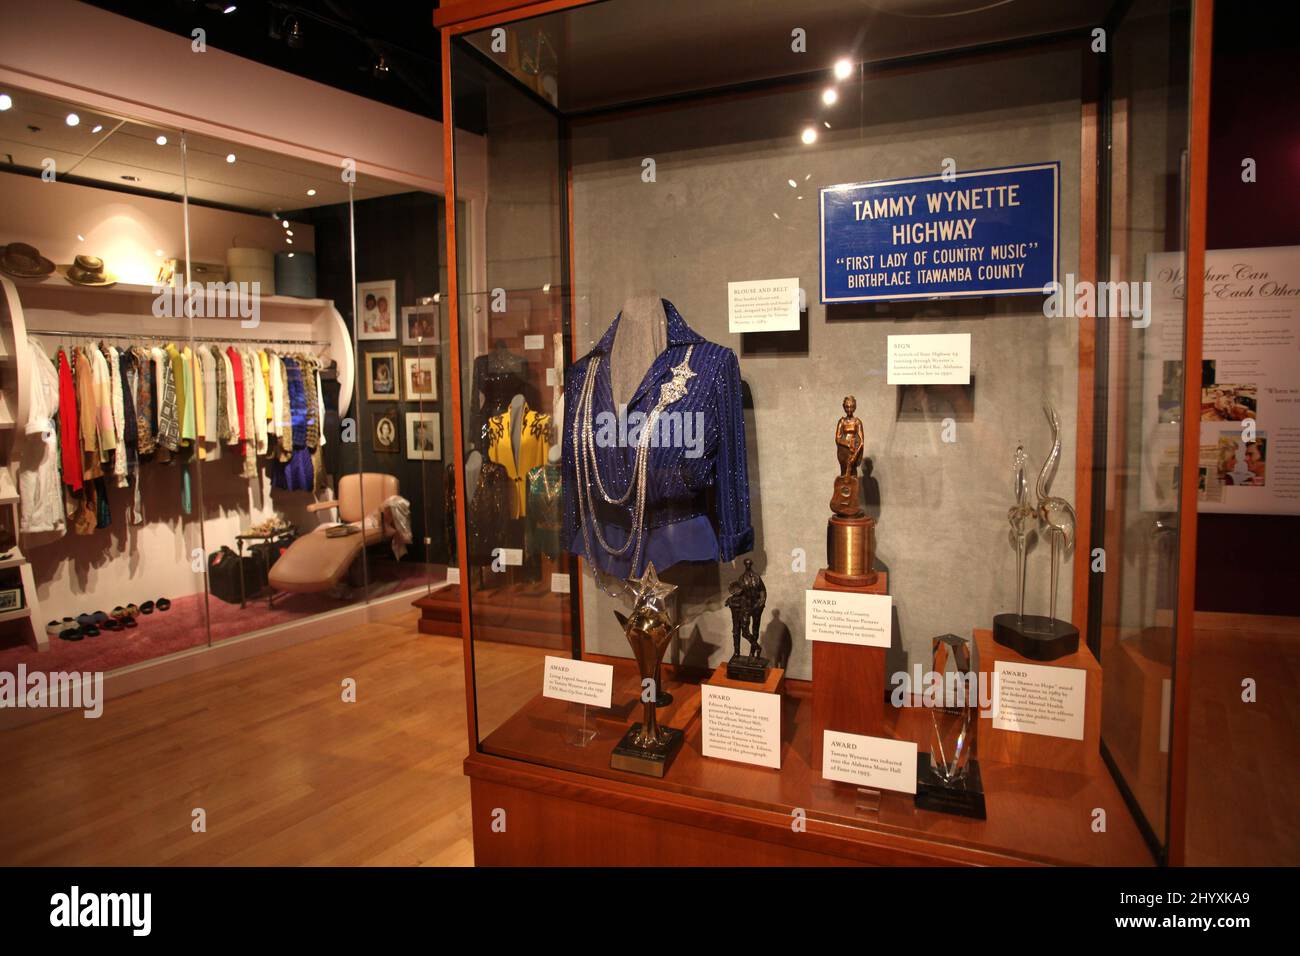 Tammy Wynette Exhibition at the Country Music Hall of Fame, Nashville Stock Photo